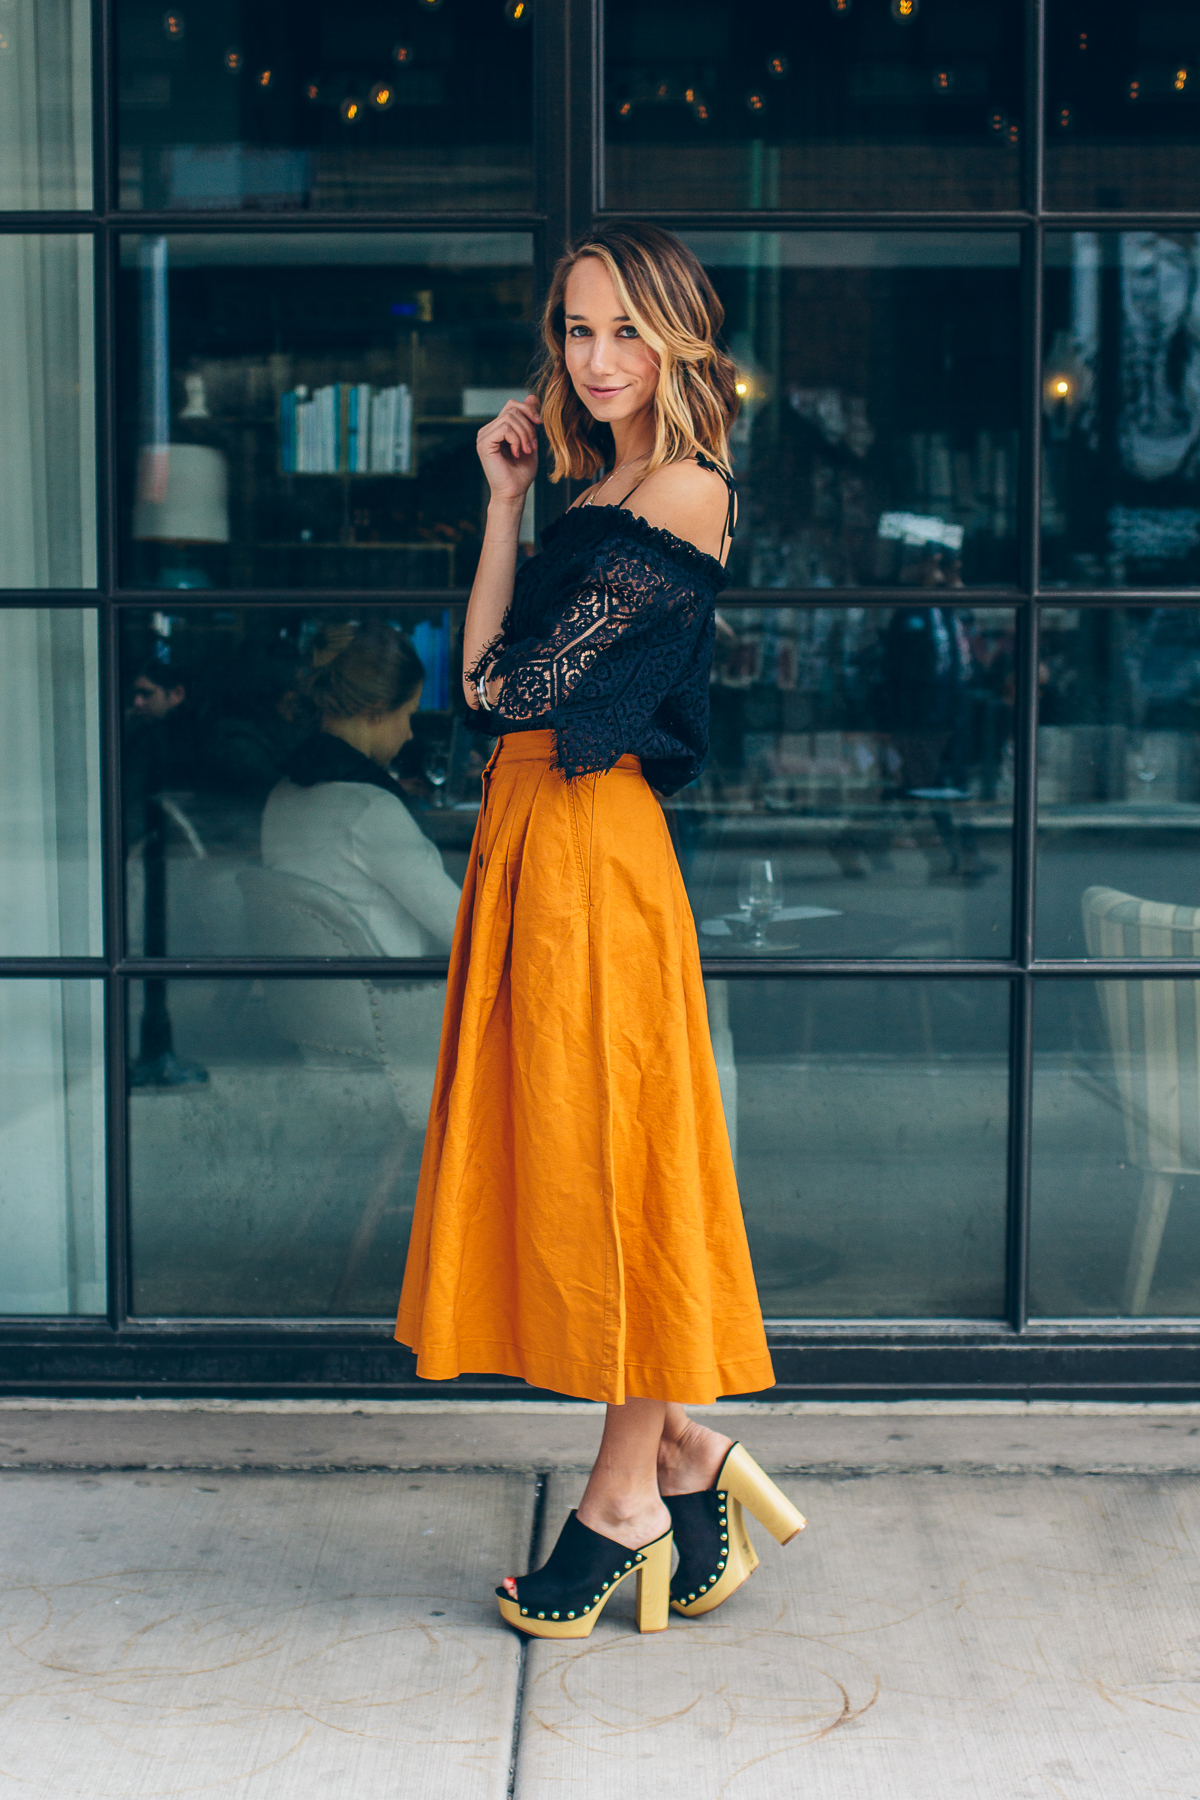 midi skirt, festival style, festival outfit, lace off the shoulder top, platform mules, spring outfit idea — via @TheFoxandShe